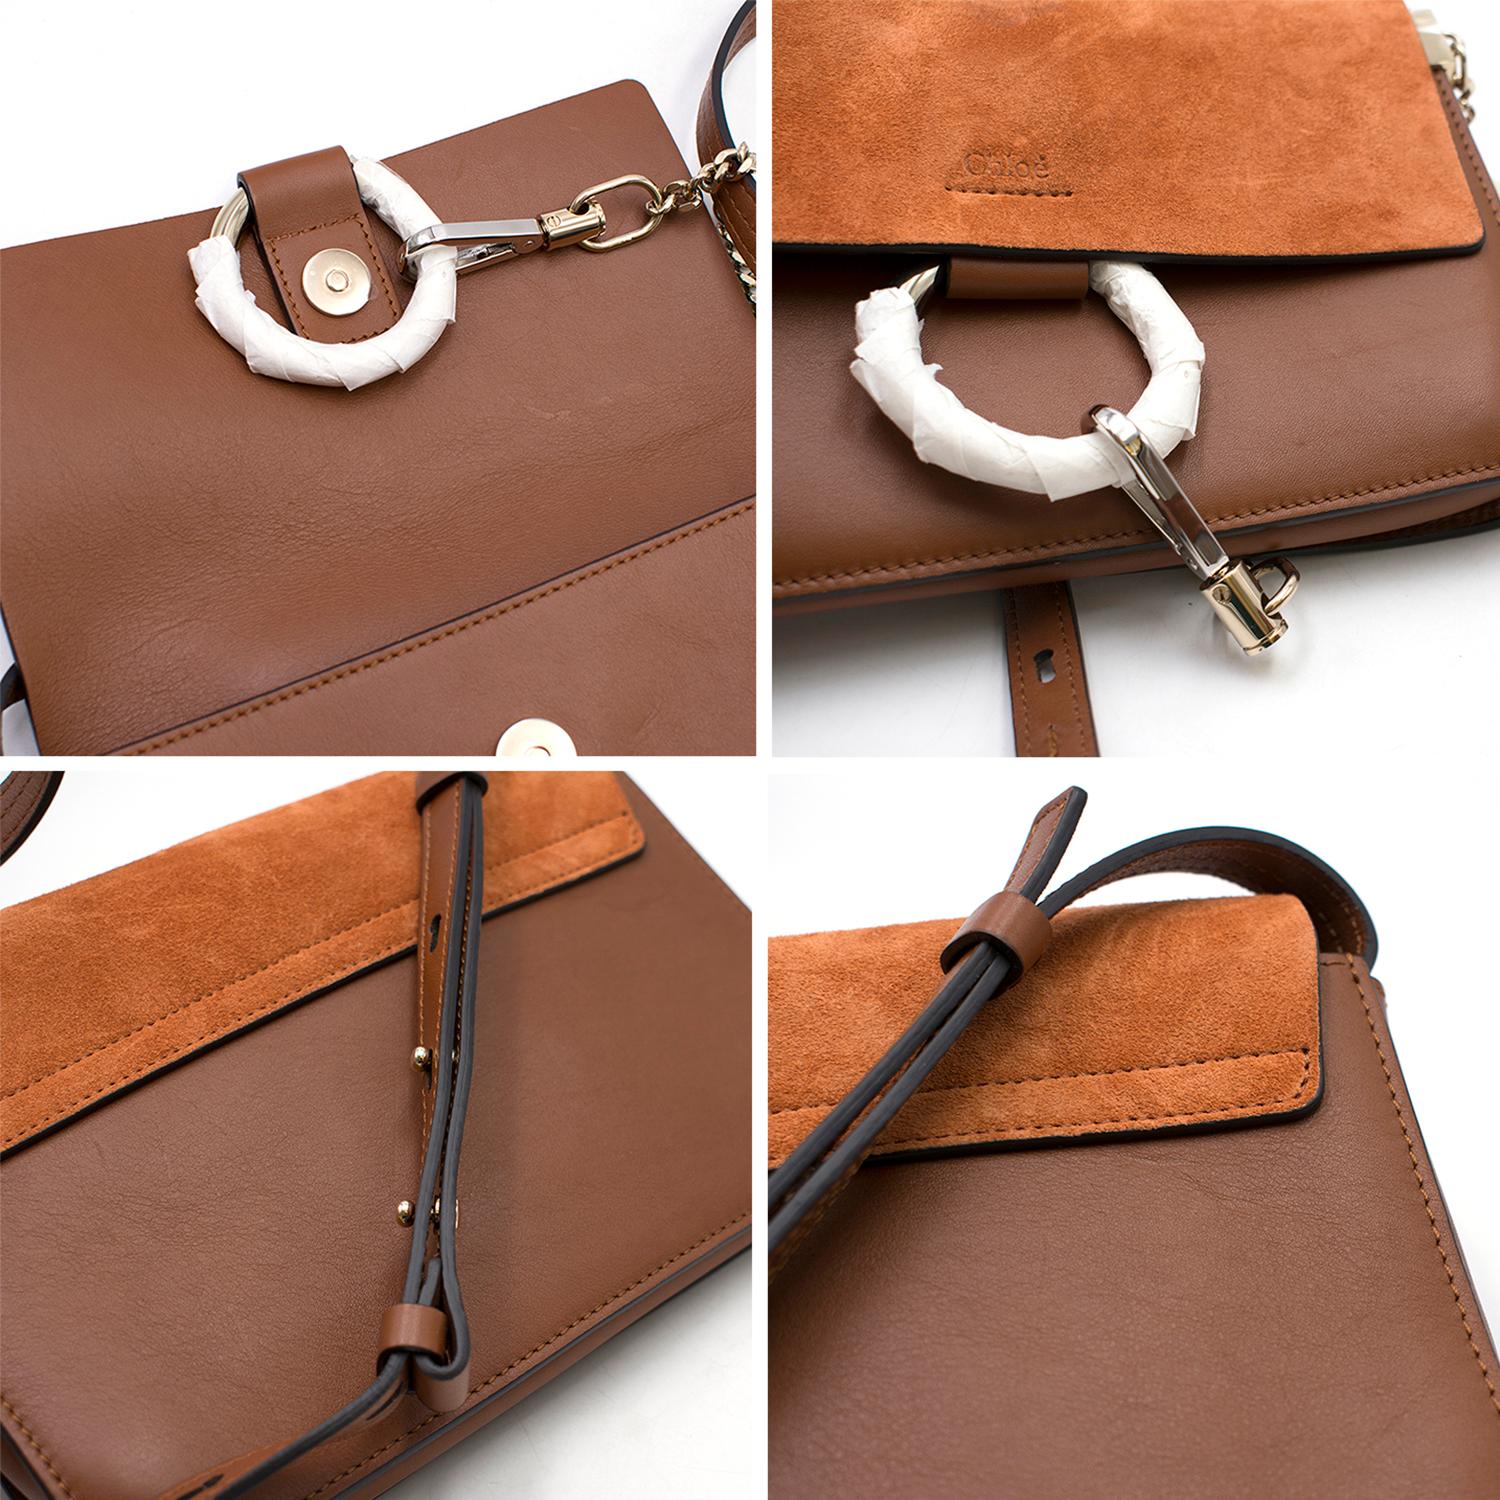 Chloe Faye Leather and Suede Crossbody Bag In New Condition For Sale In London, GB